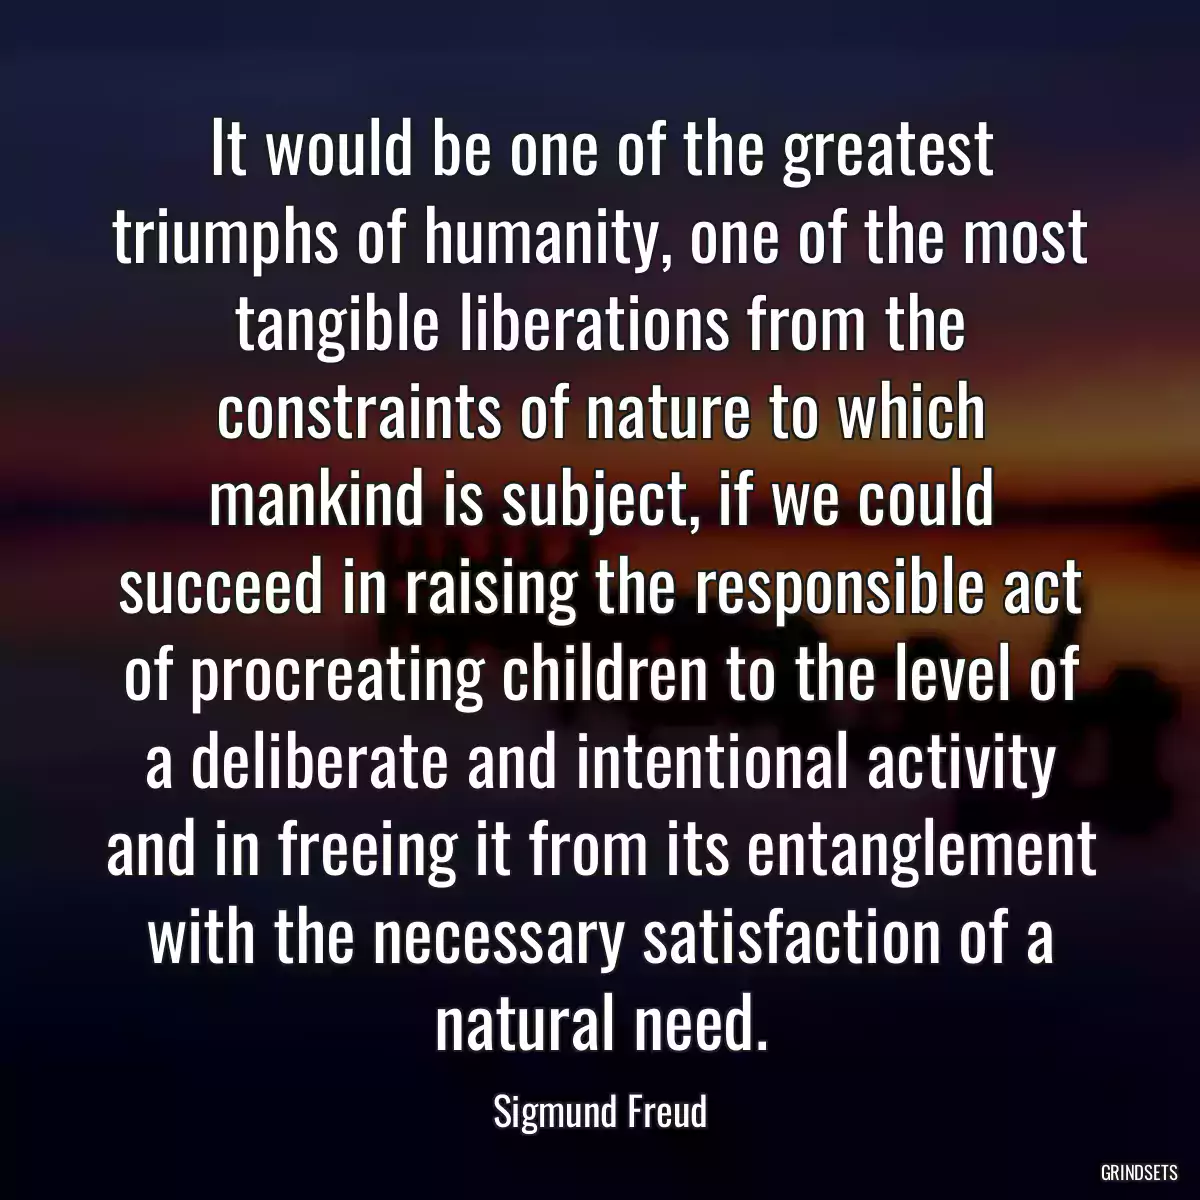 It would be one of the greatest triumphs of humanity, one of the most tangible liberations from the constraints of nature to which mankind is subject, if we could succeed in raising the responsible act of procreating children to the level of a deliberate and intentional activity and in freeing it from its entanglement with the necessary satisfaction of a natural need.